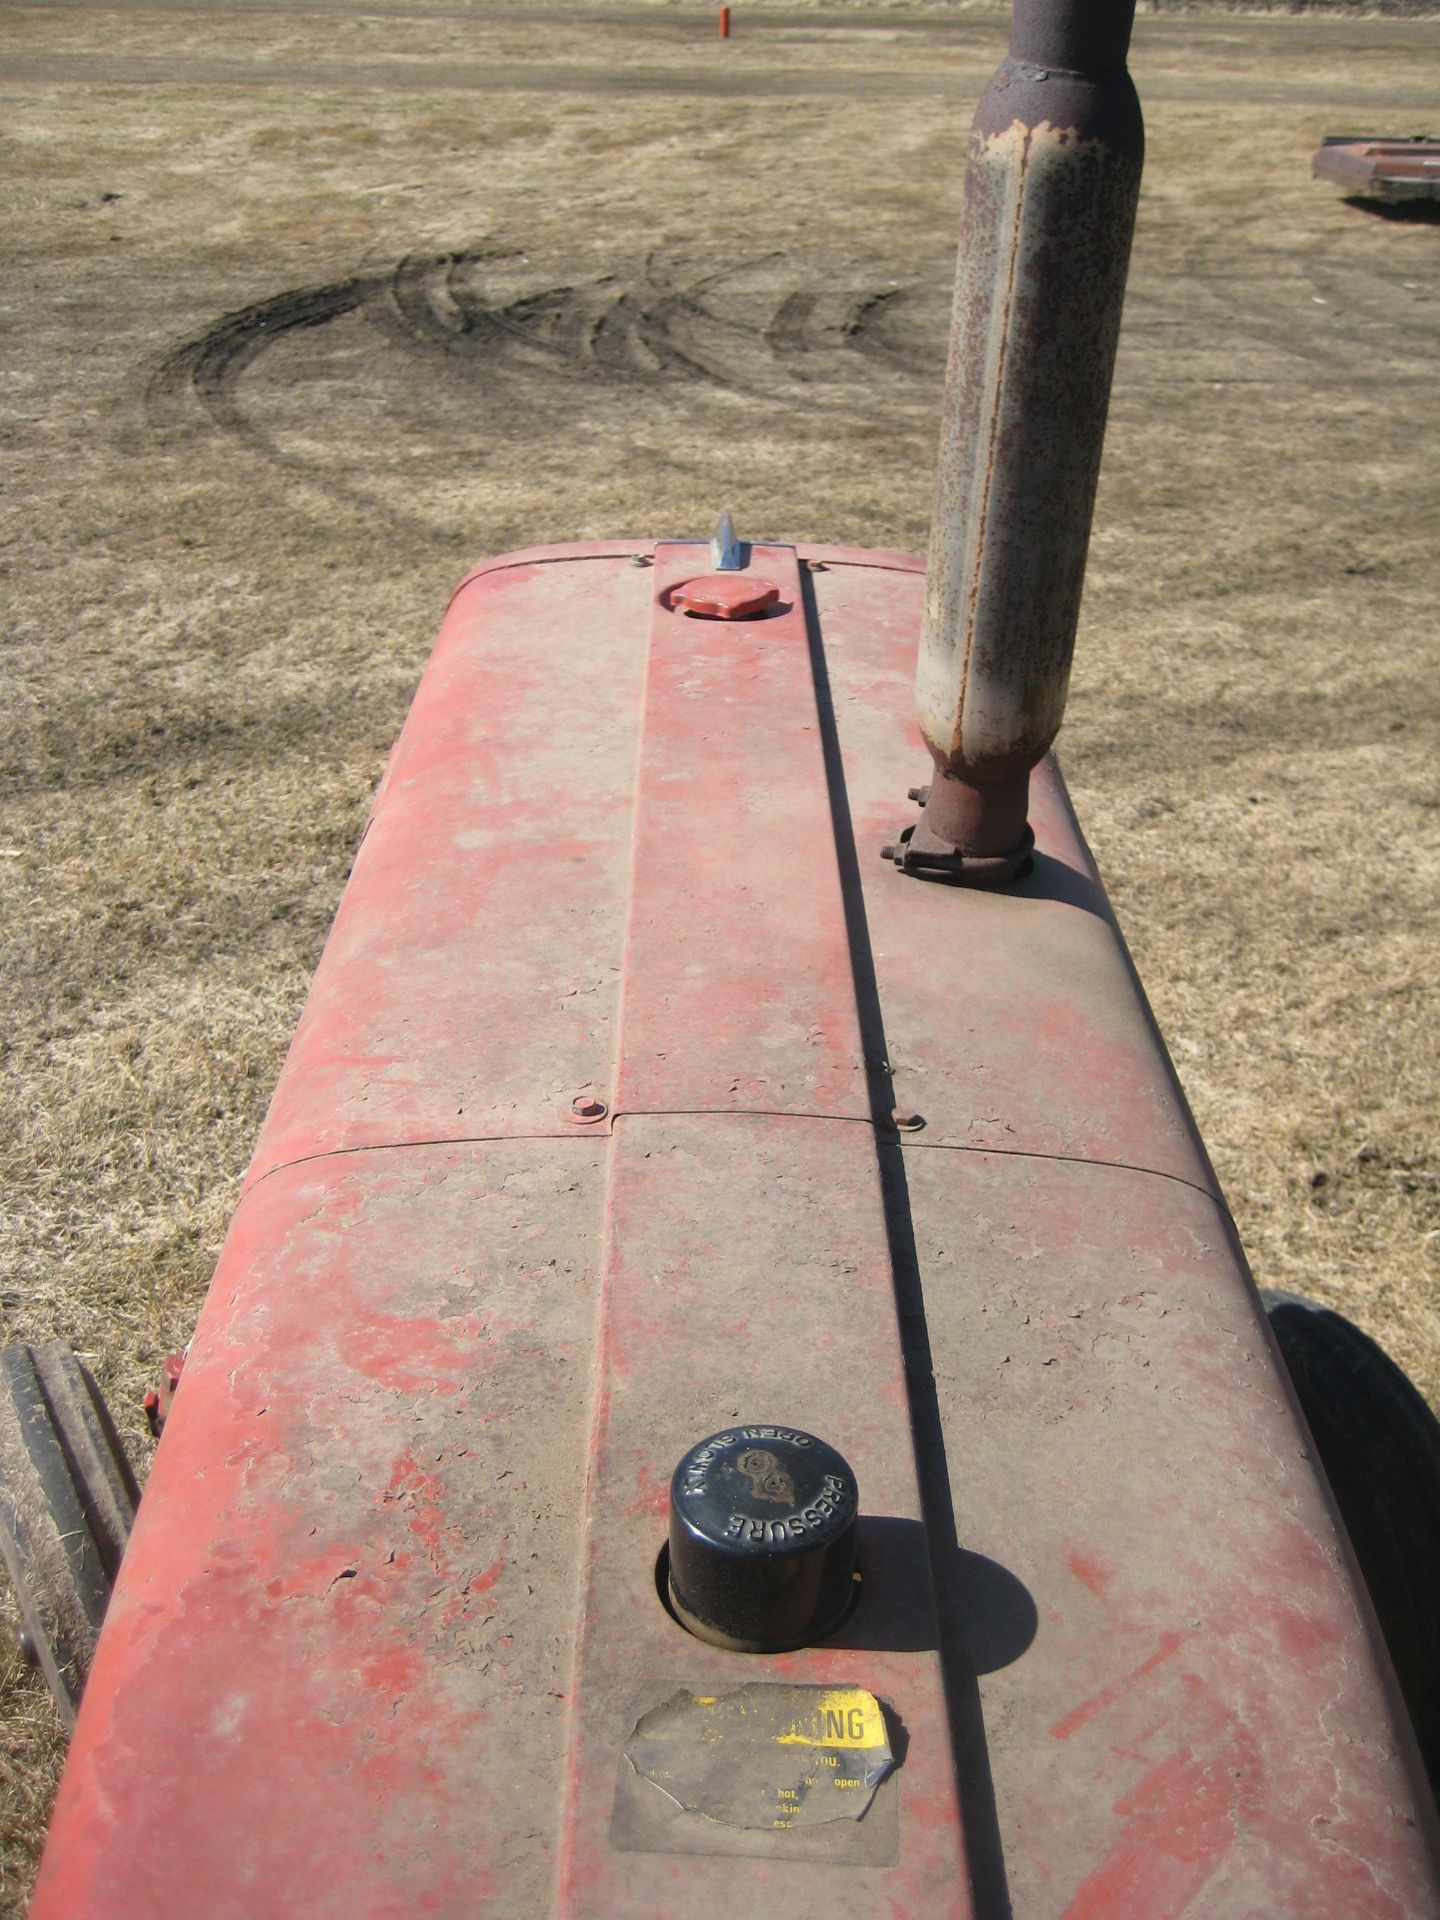 FARMALL 656, GAS, USED LITTLE LAST FEW YEARS, NO KNOWN PROBLEMS, 15.5x 38 Tires, SN-24032 - Image 18 of 18